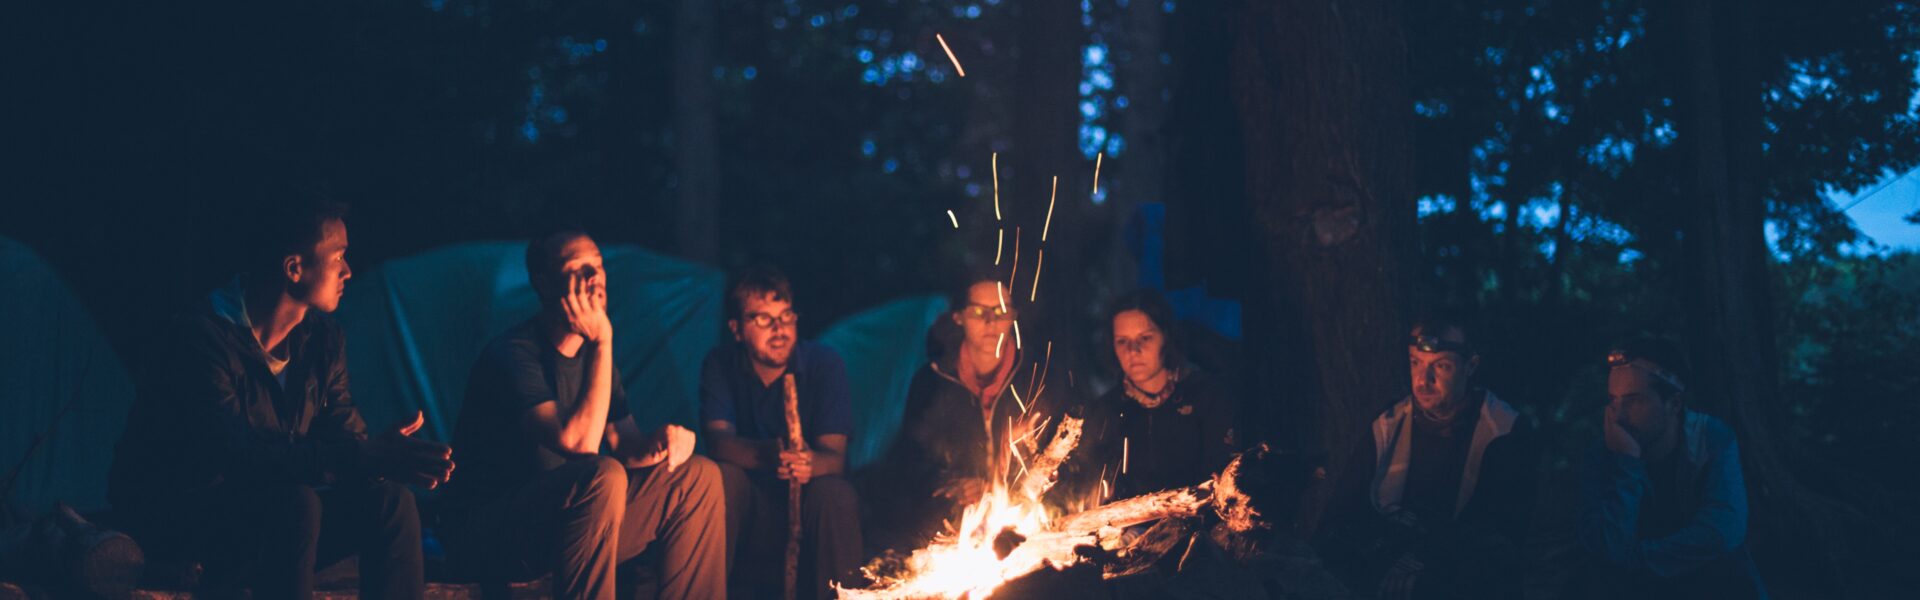 group of people camping fire